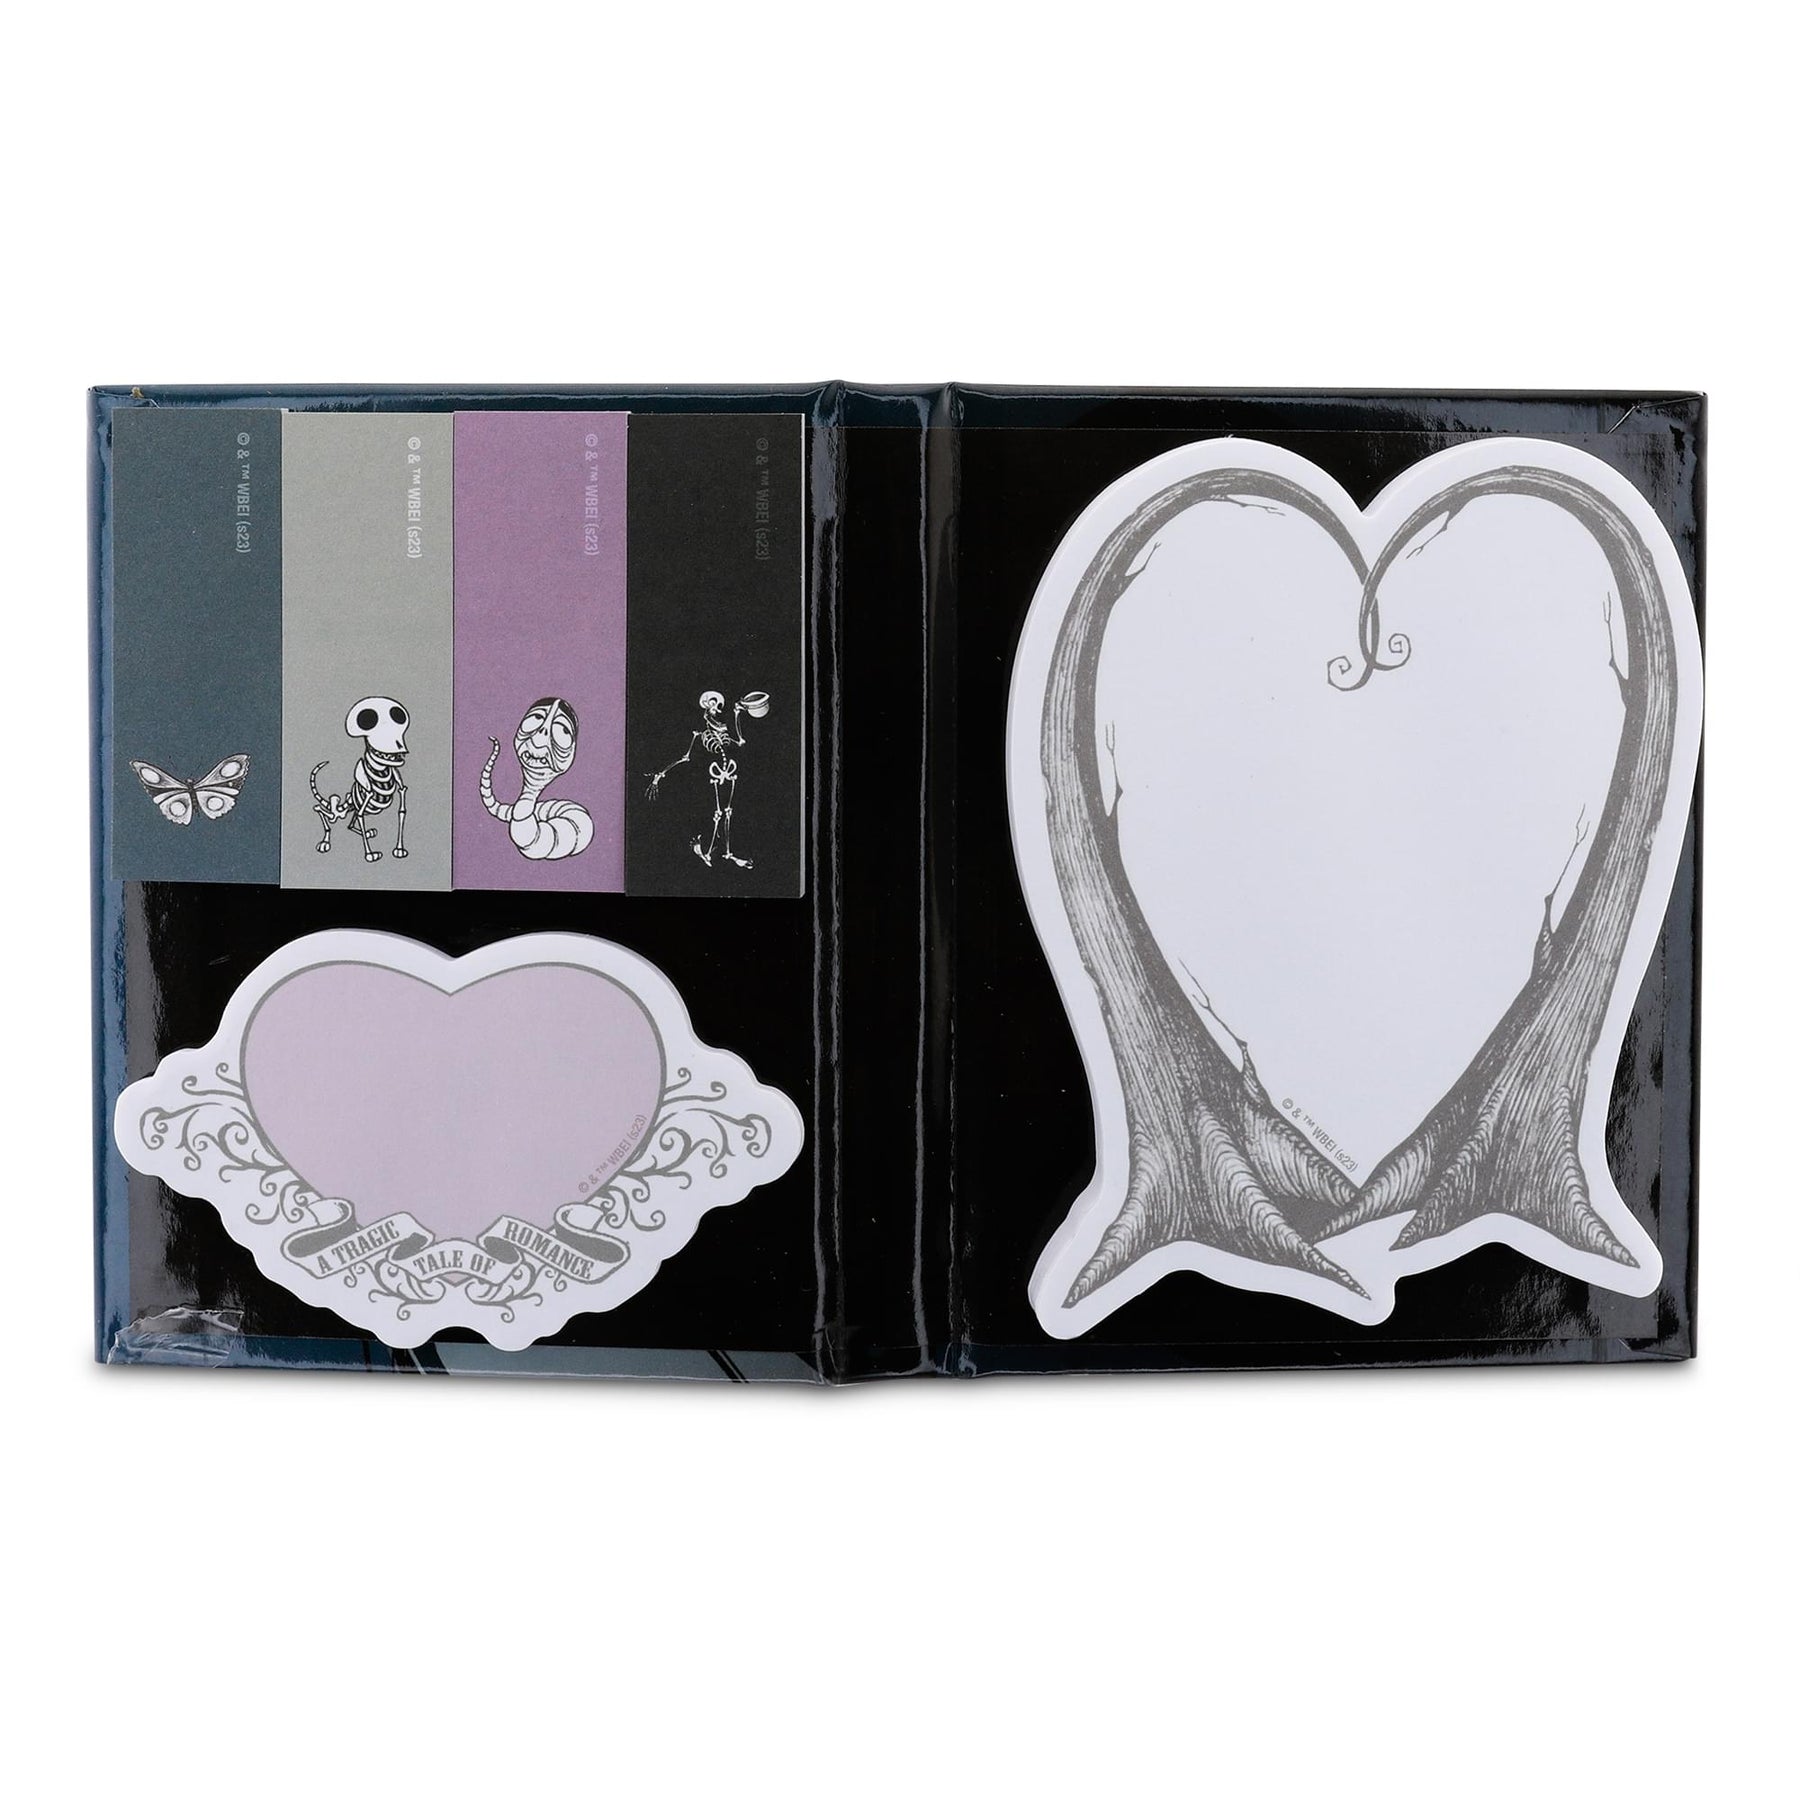 Tim Burton's Corpse Bride Butterflies Sticky Note and Tab Box Set